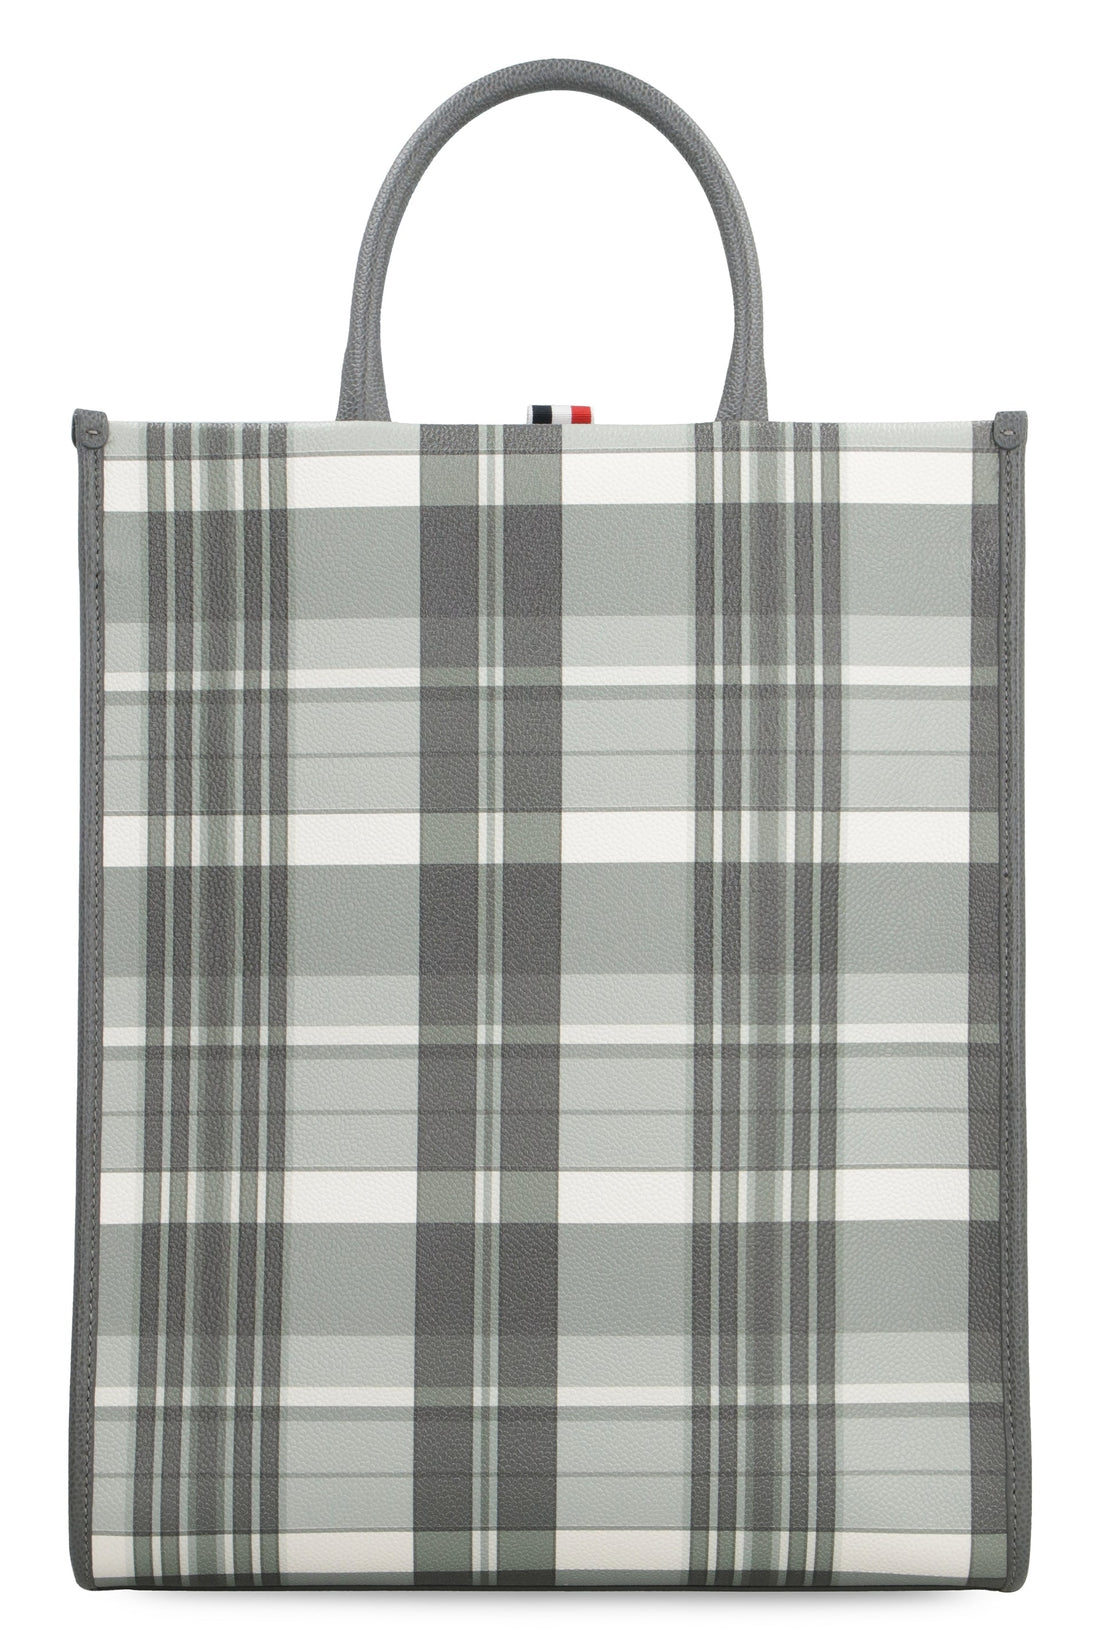 Thom Browne-OUTLET-SALE-Vertical leather tote-ARCHIVIST